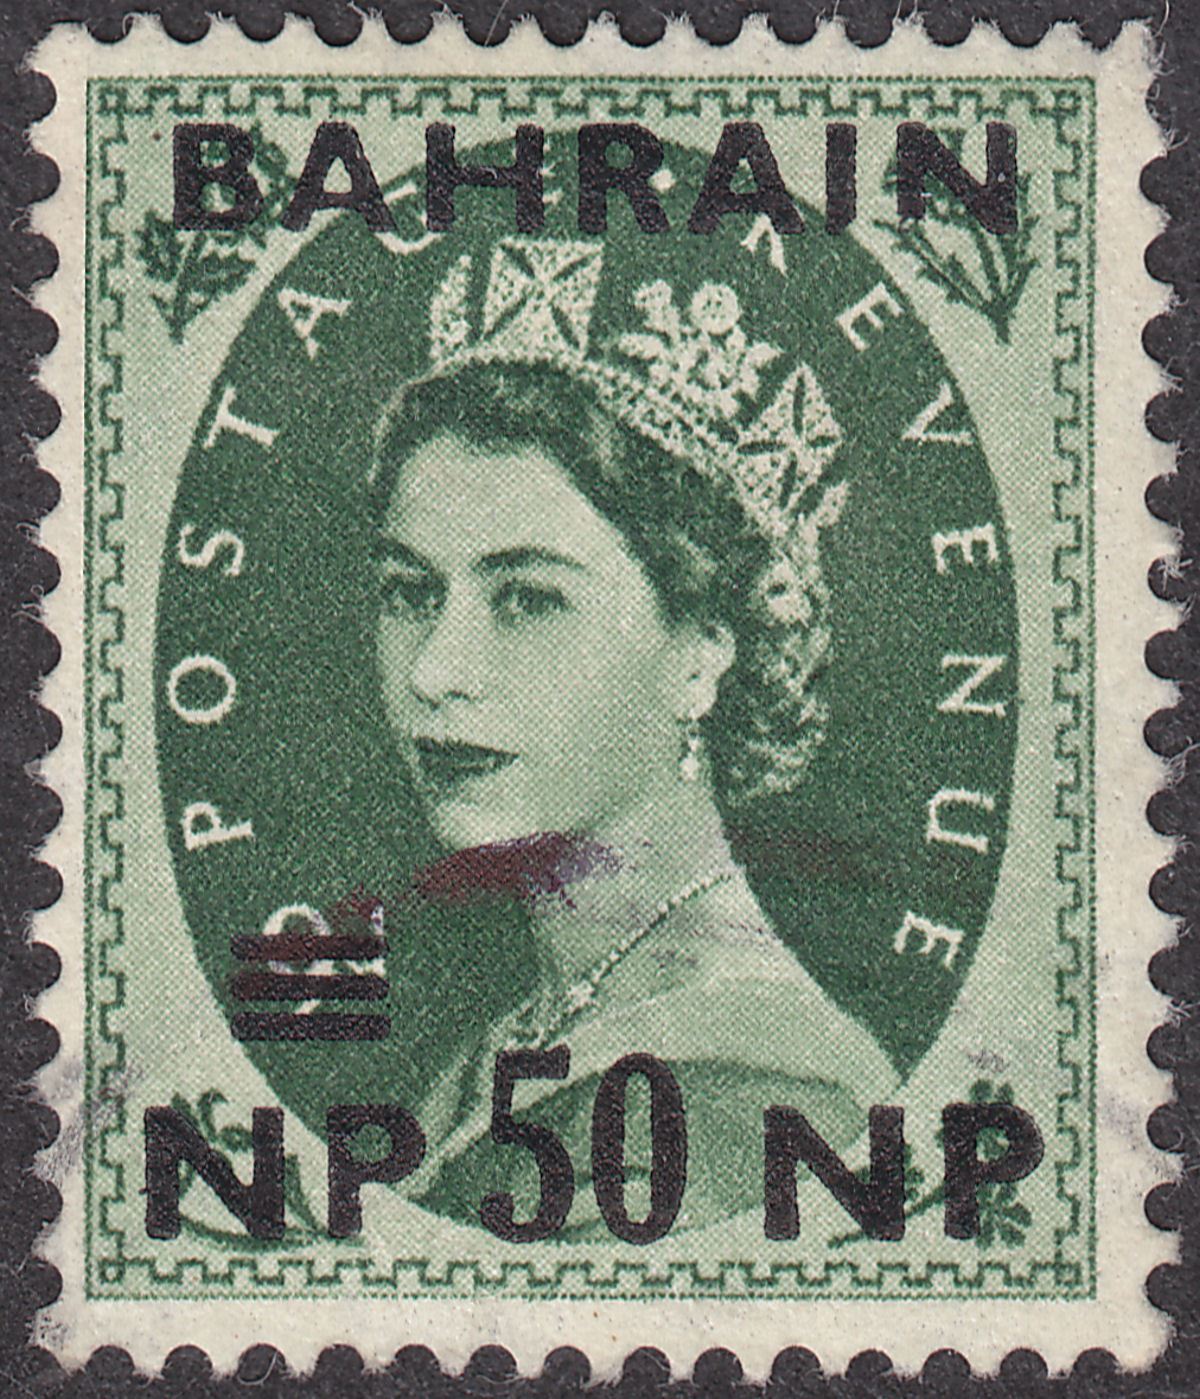 Bahrain 1957 QEII 50np Surcharge on 9d Sliced I and N in BAHRAIN Variety Used